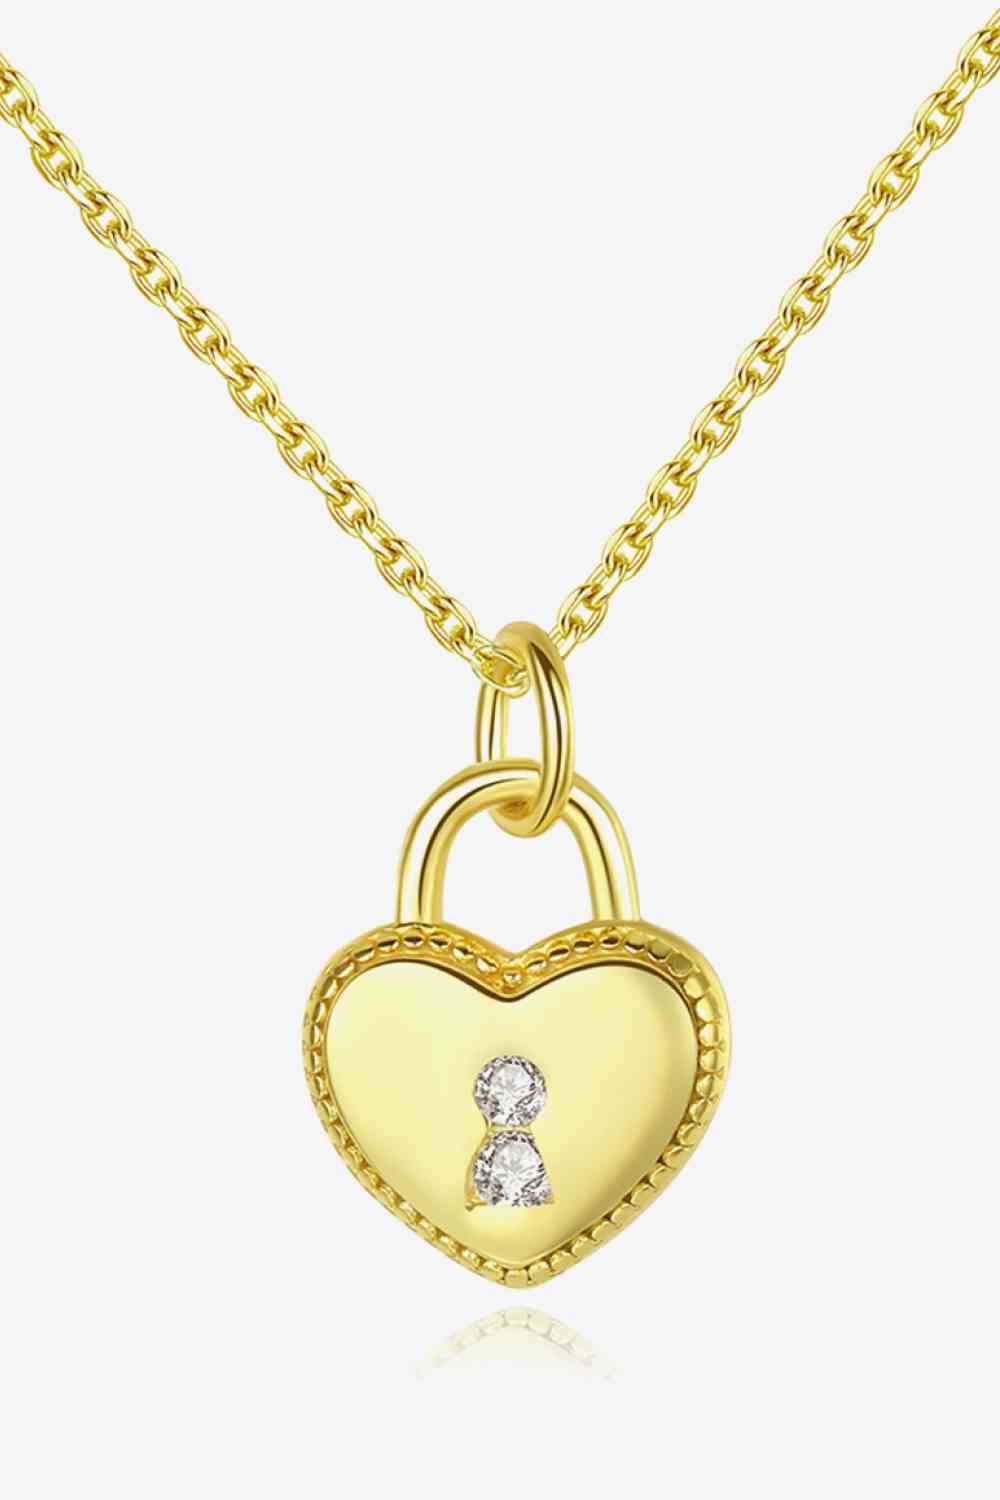 Heart Lock Pendant 925 Sterling Silver Necklace - Everyday-Sales.com